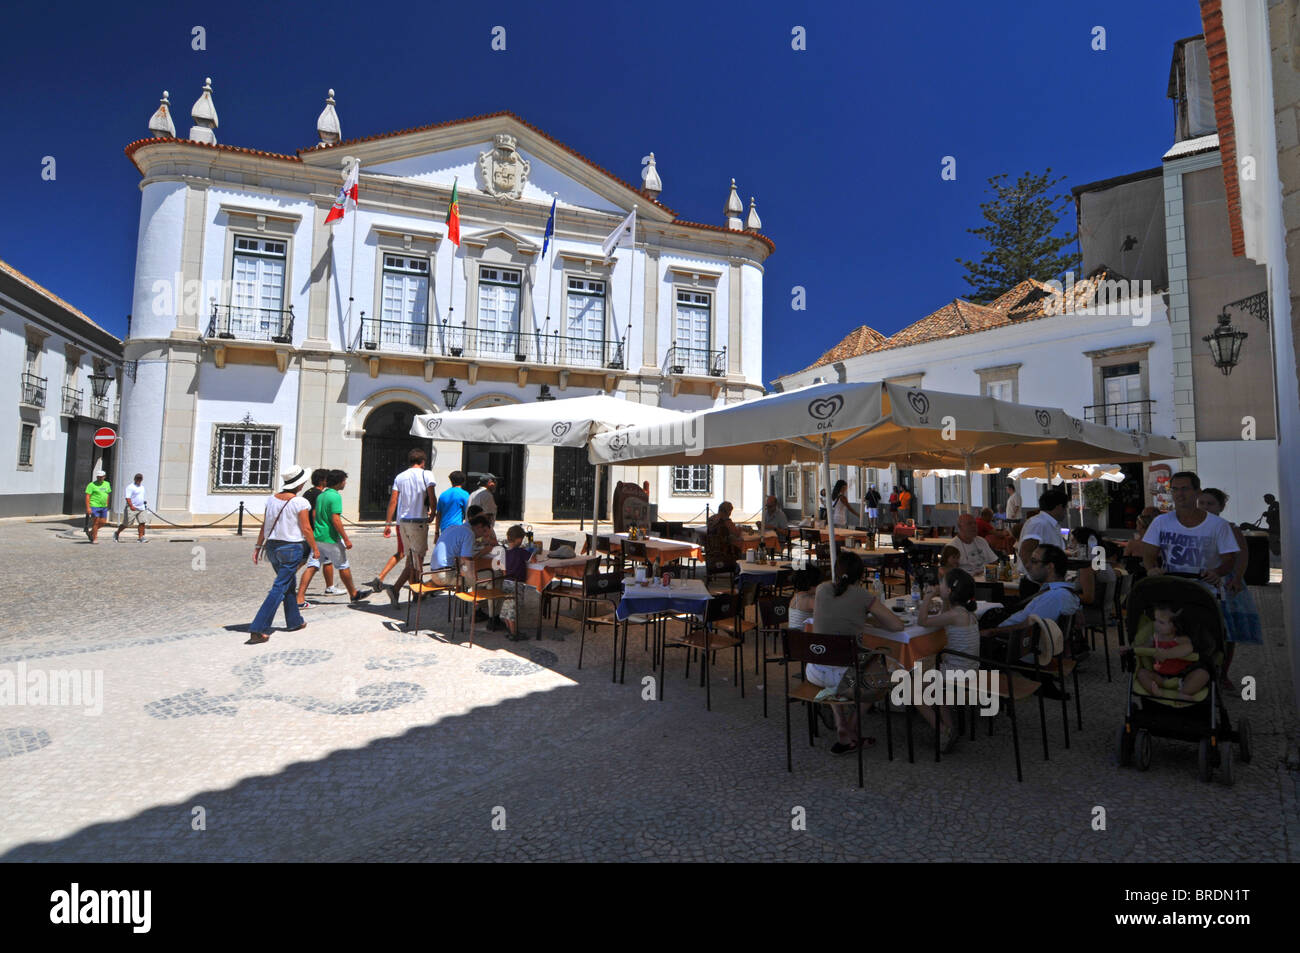 City Hall and cafe, Velha, Faro old town, Portugal Stock Photo